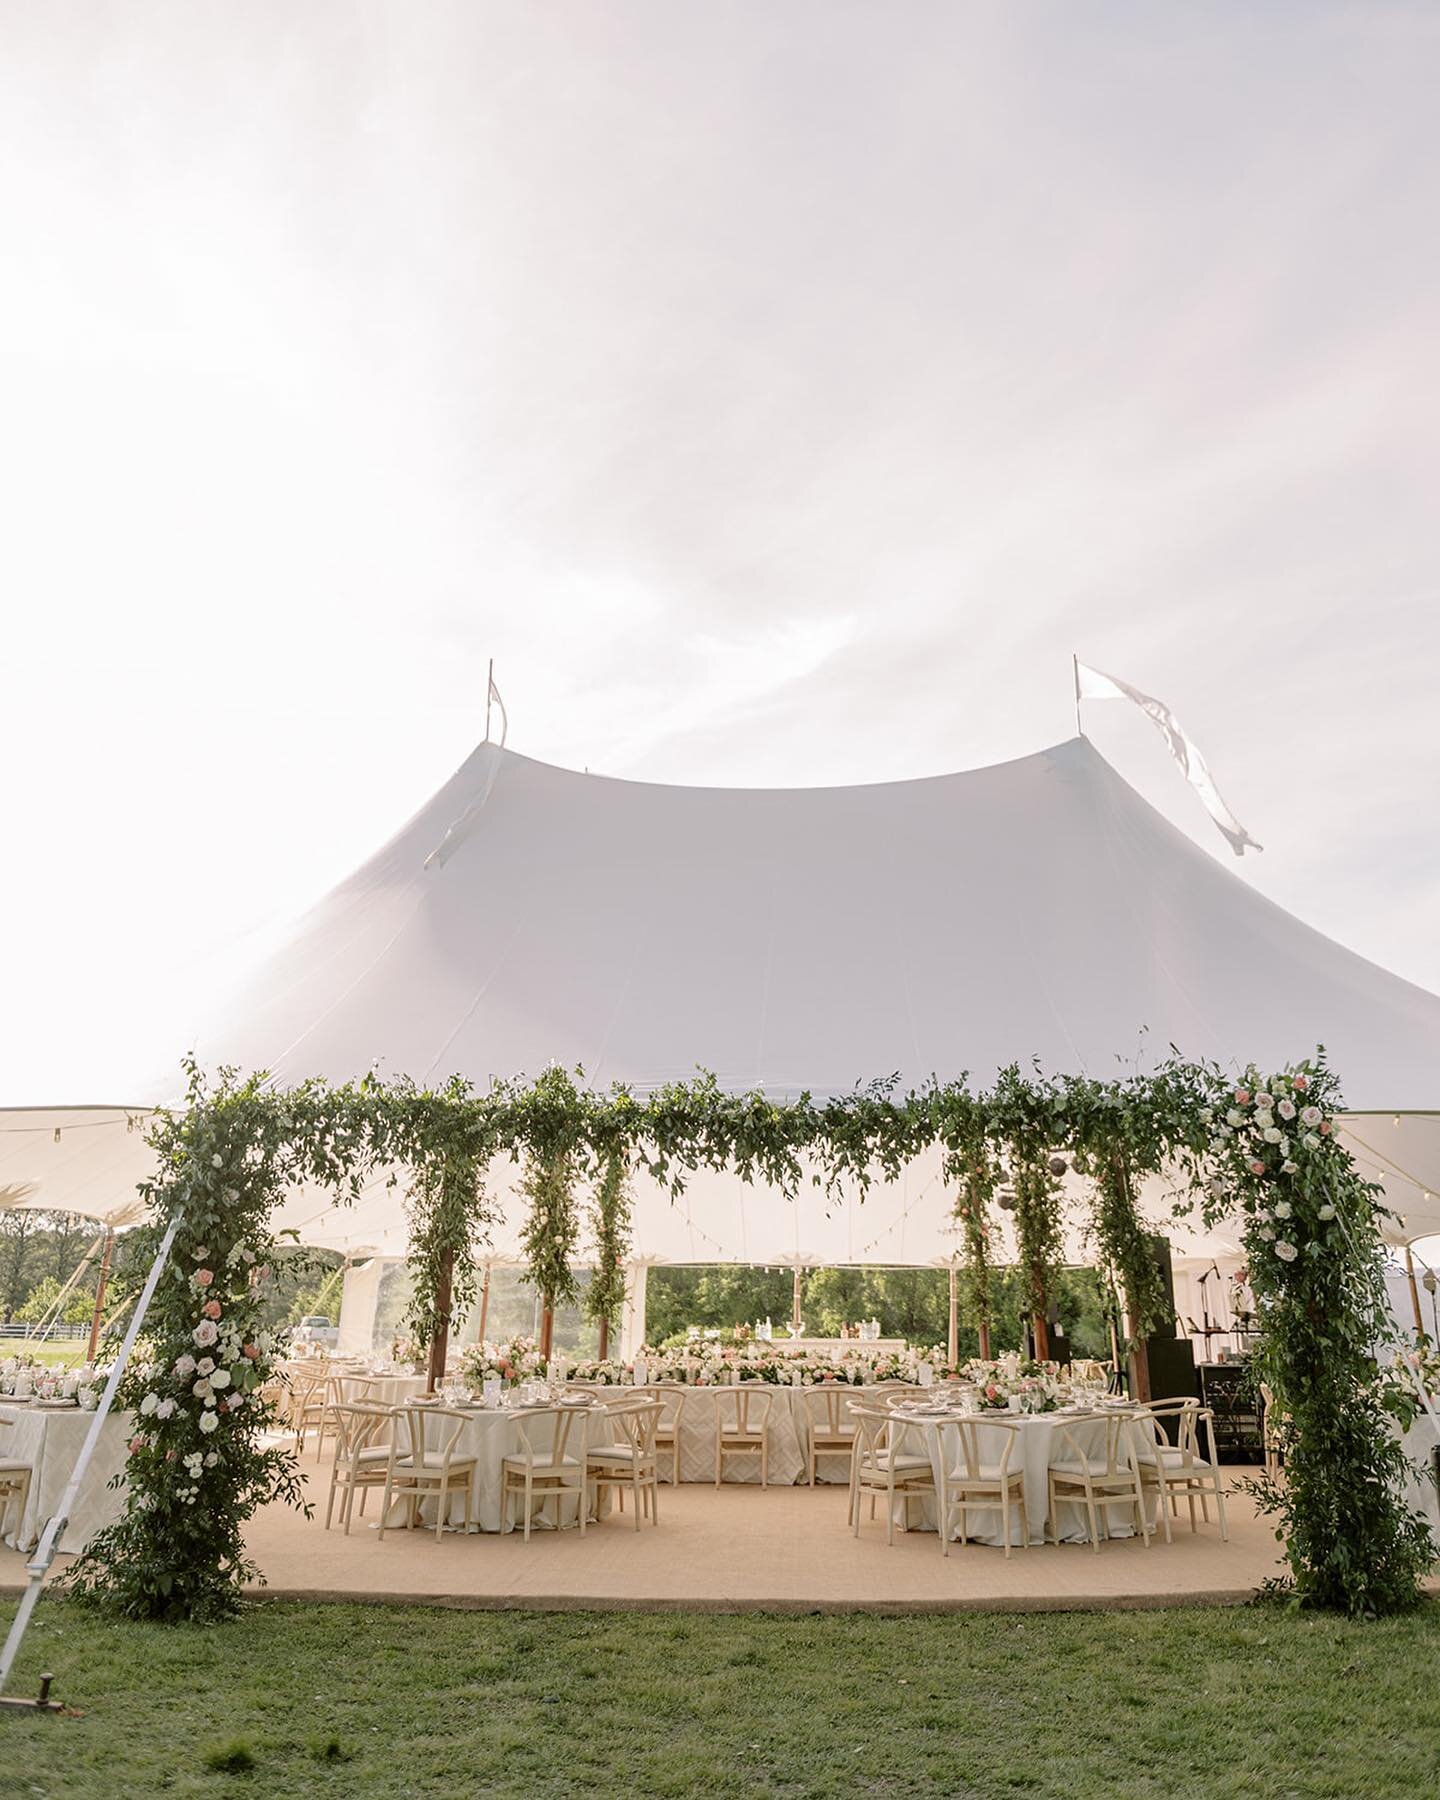 As a floral designer, it's always our dream to design an atmosphere that captures the essence of a couple's love story. Under this sailcloth tent, we had the honor of designing a floral installation that enhanced the whimsical charm that a tented rec